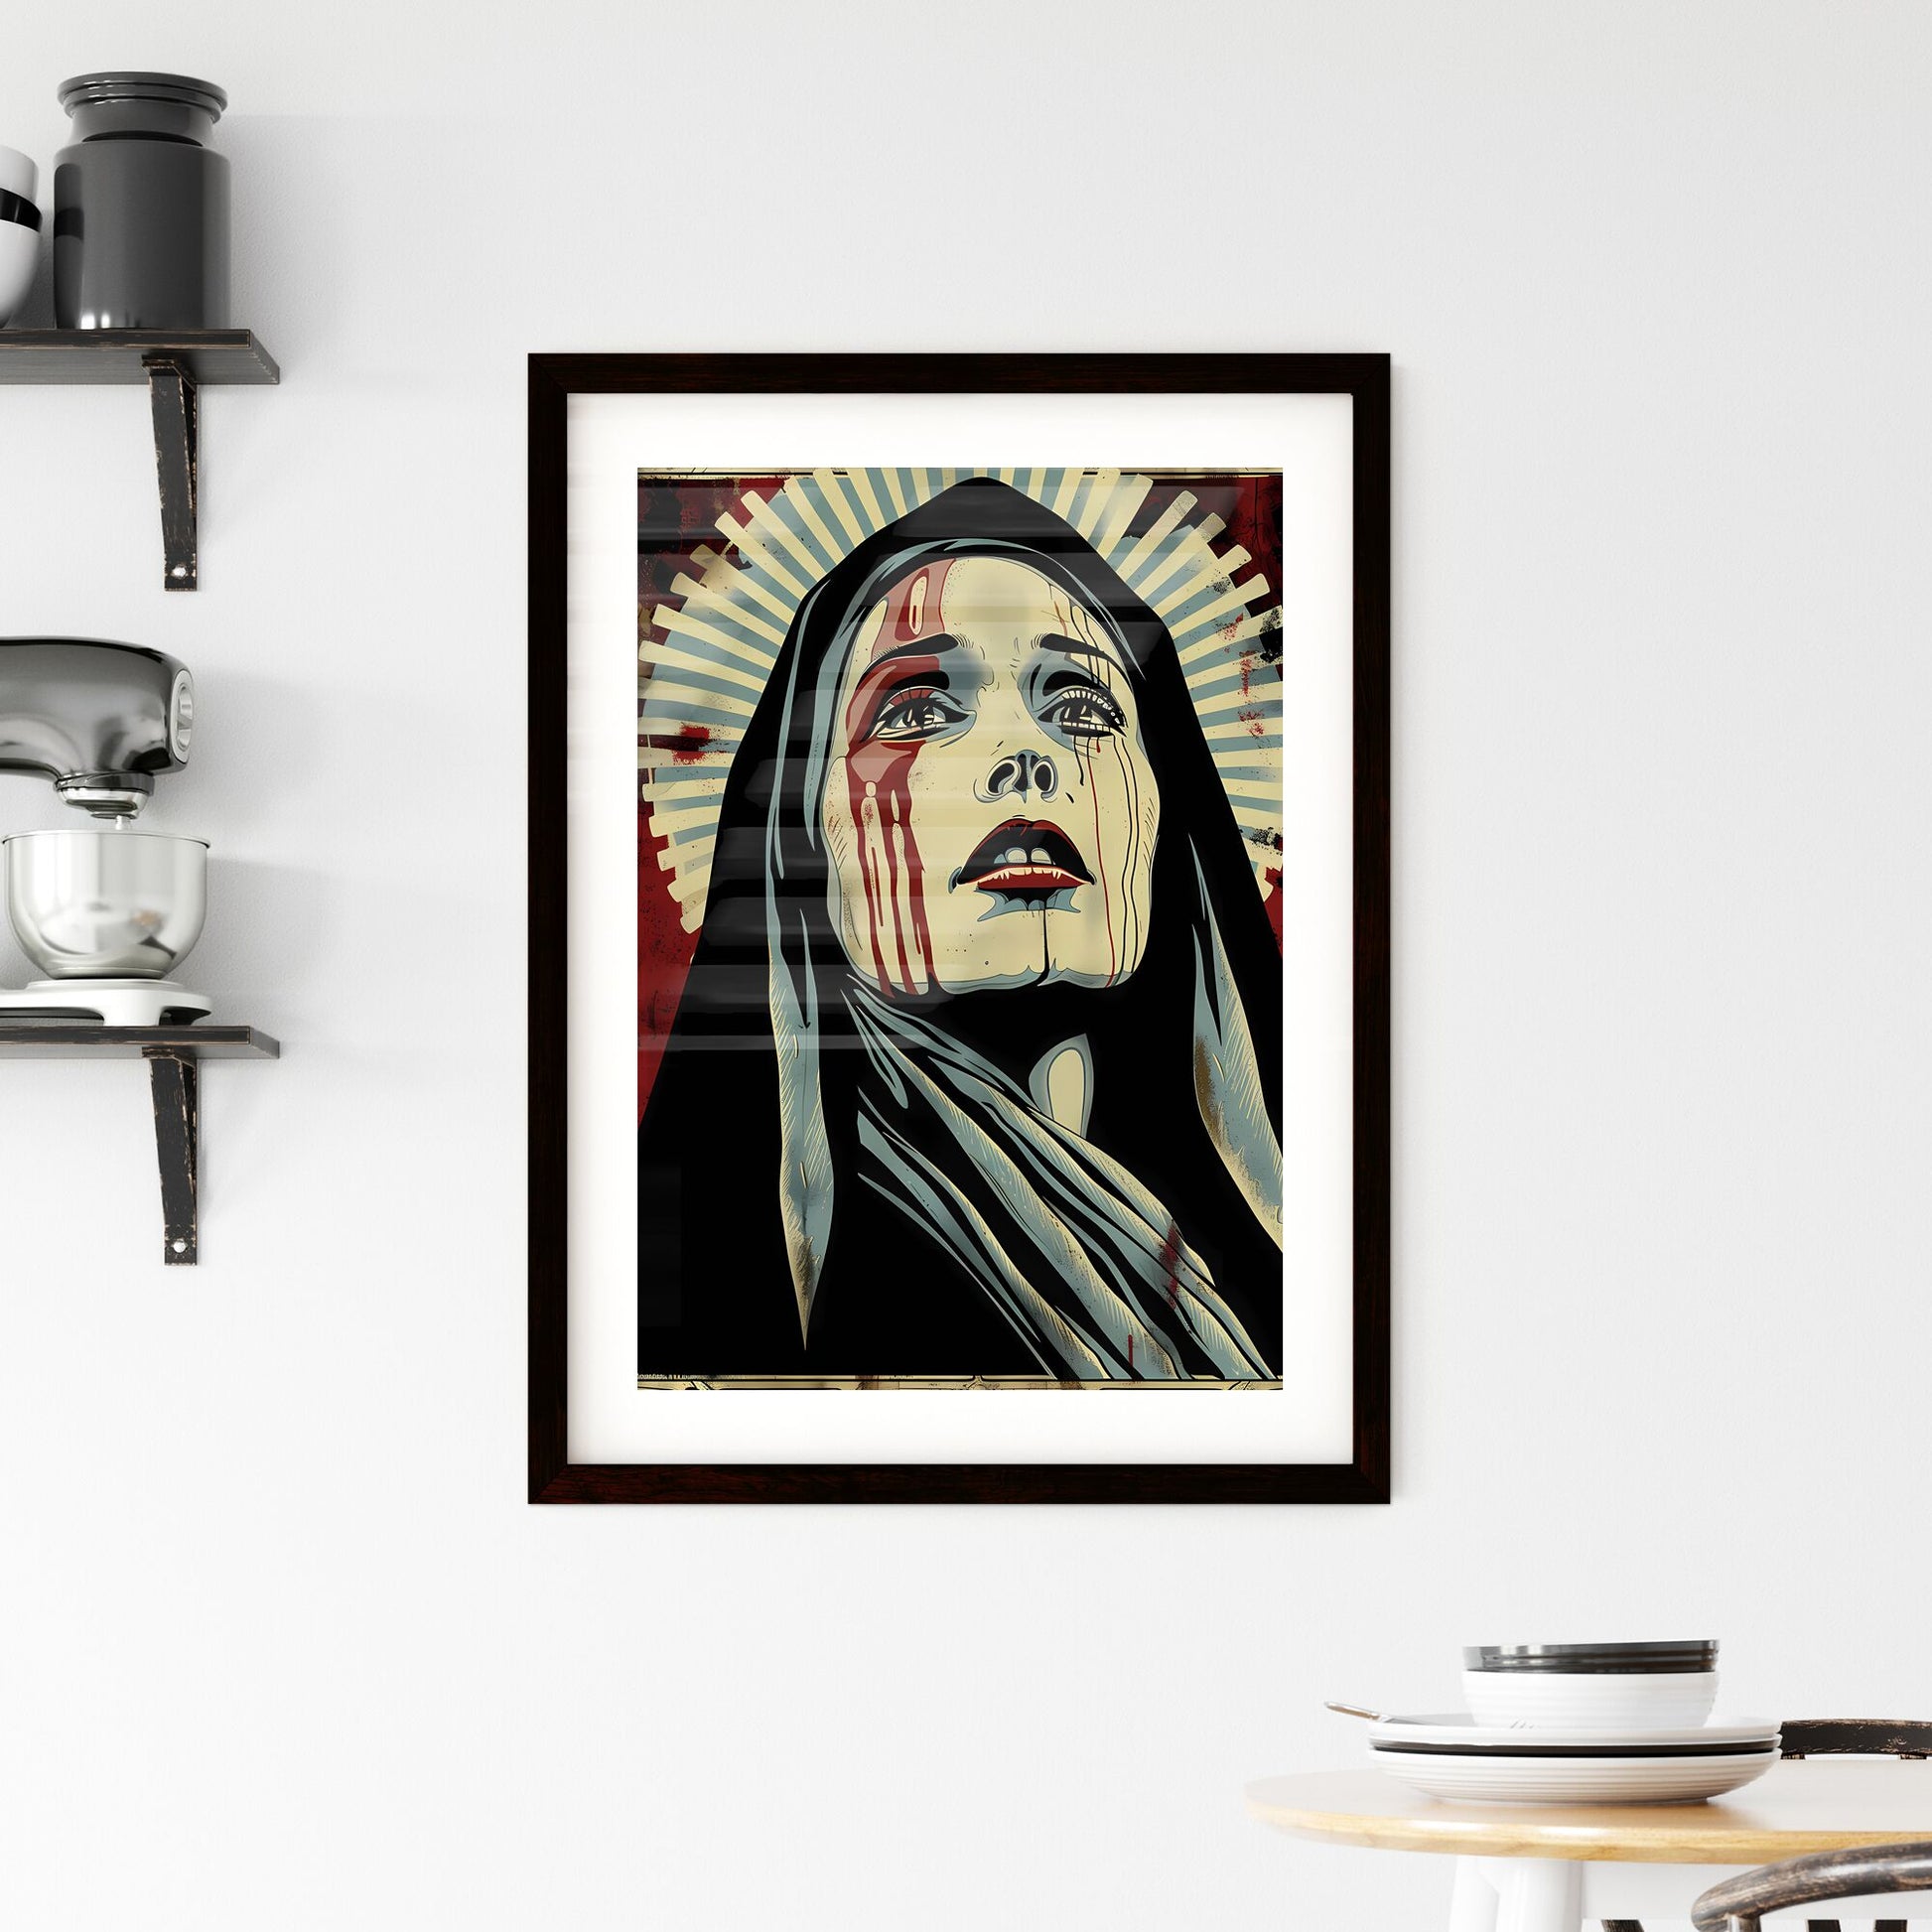 Pop Art Vectorized Religious Occult Gothic Horror Movie Stock Image Concept of Virgin Mary With Blood on Face Default Title